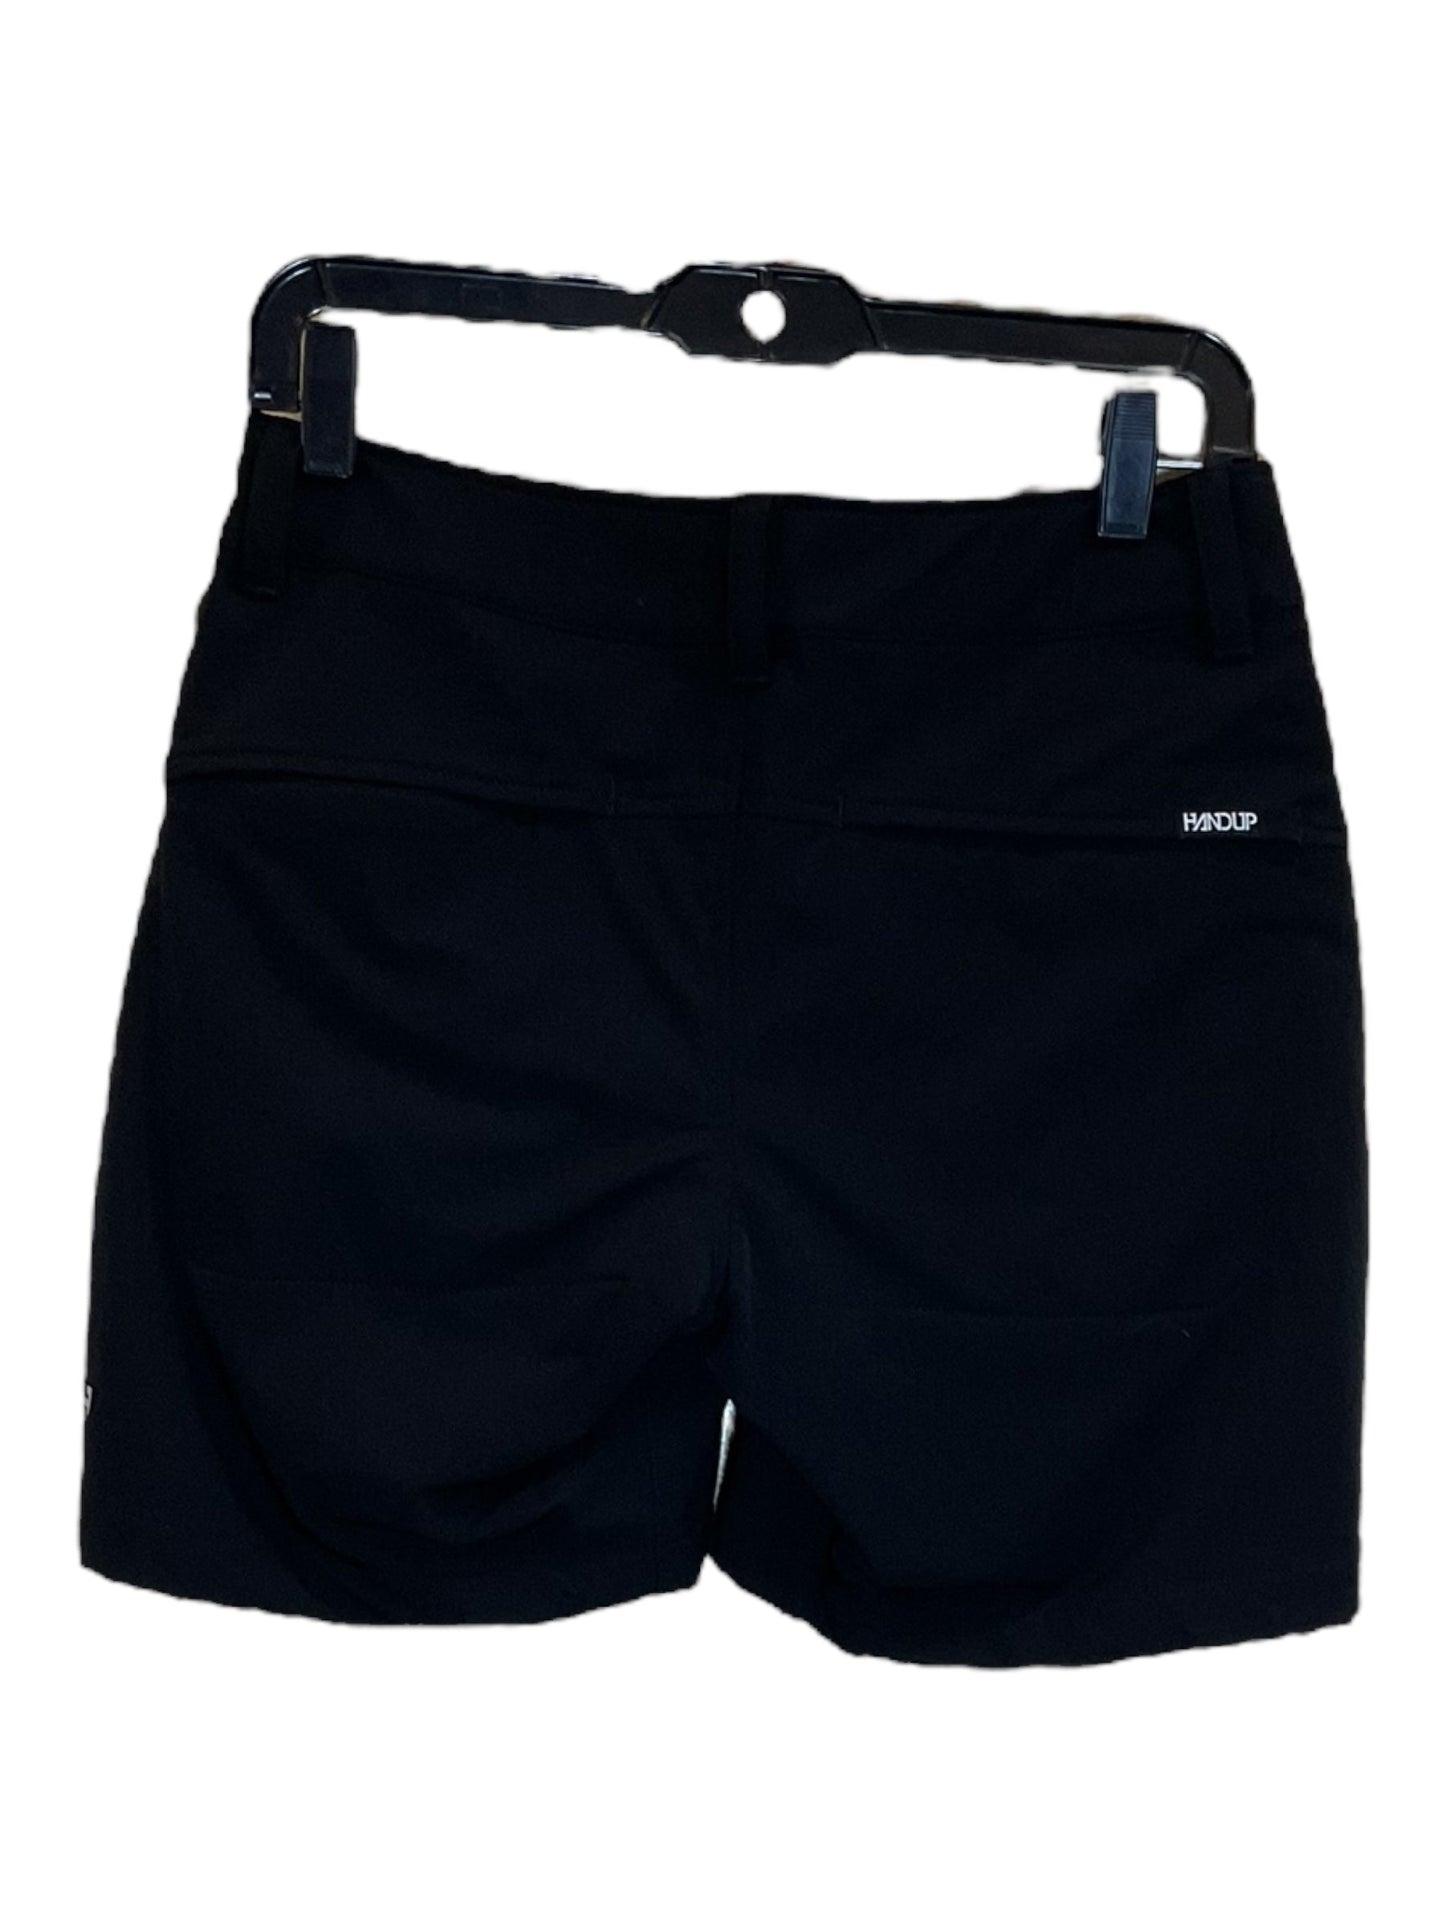 Black Shorts Clothes Mentor, Size S